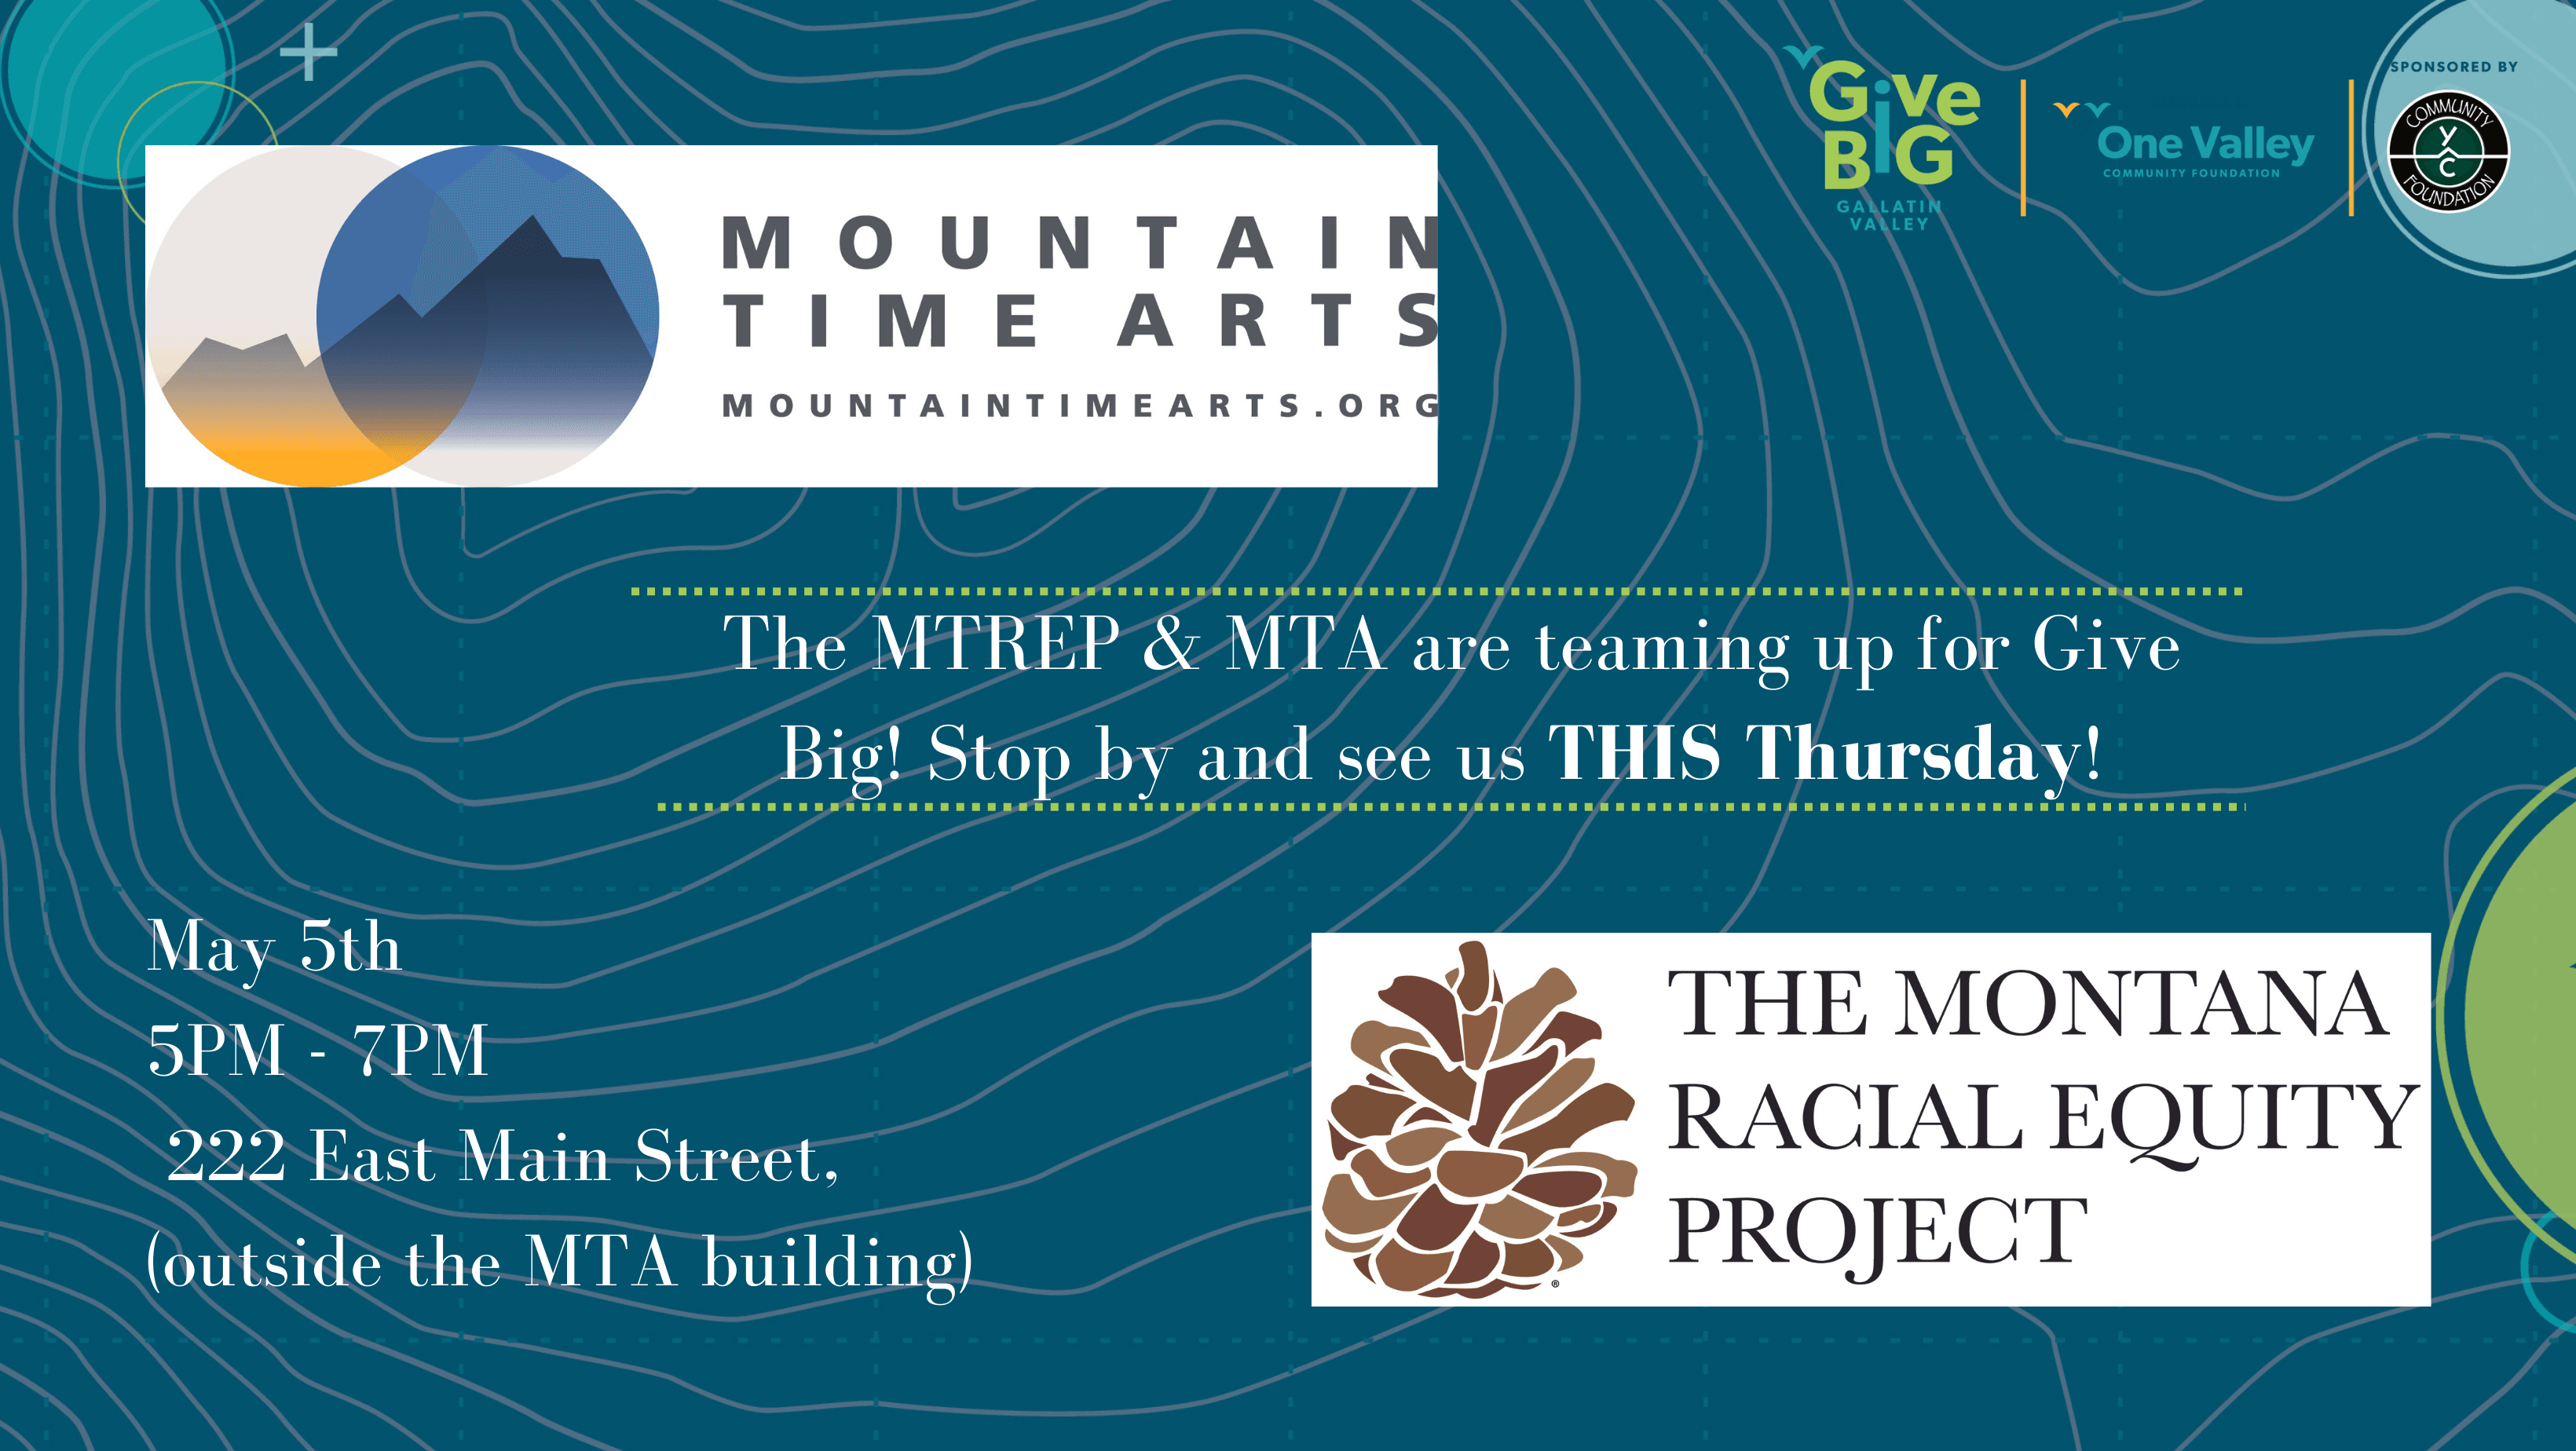 The Montana Racial Equity Project is partnering with Mountain Time Arts to launch into Give Big. This Thursday, 5/5, from 5 to 7pm, outside the Mountain Time Arts building